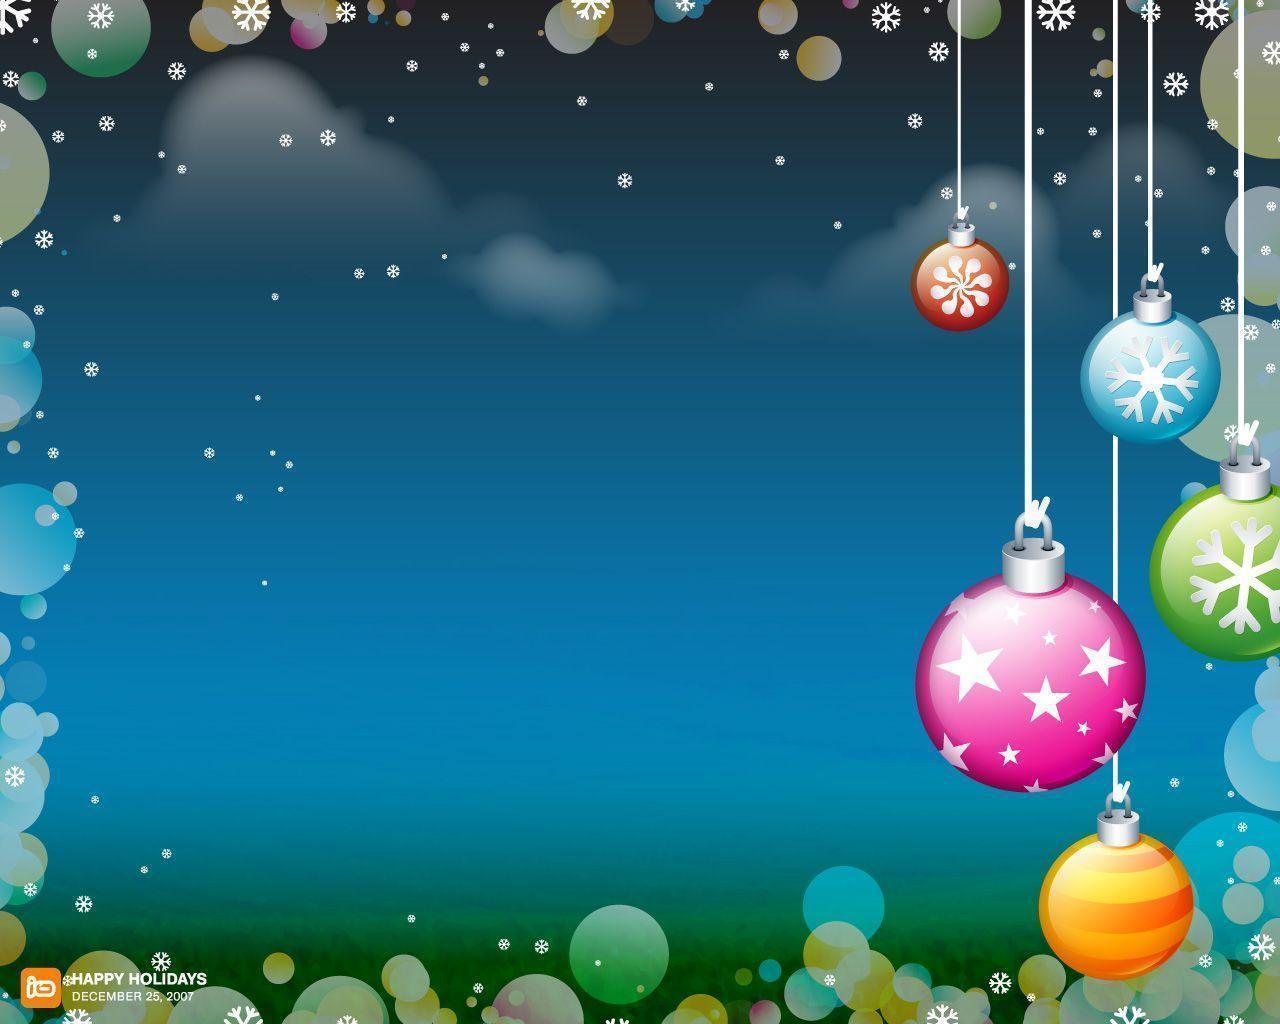 Wallpaper For > Christian Christmas Background Image Free Download